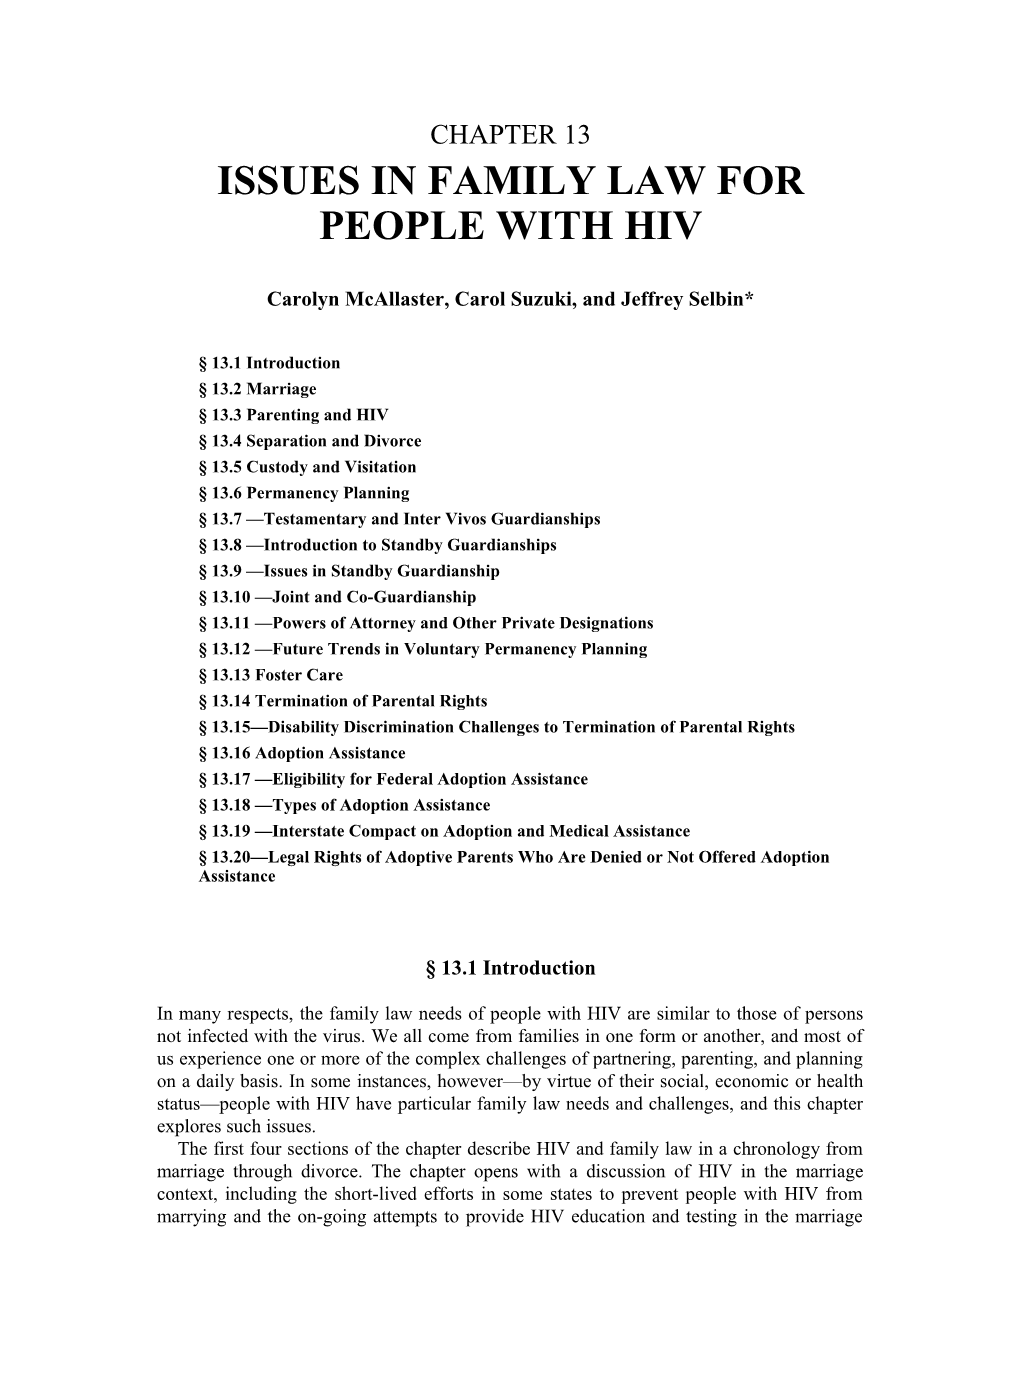 Issues in Family Law for People with Hiv